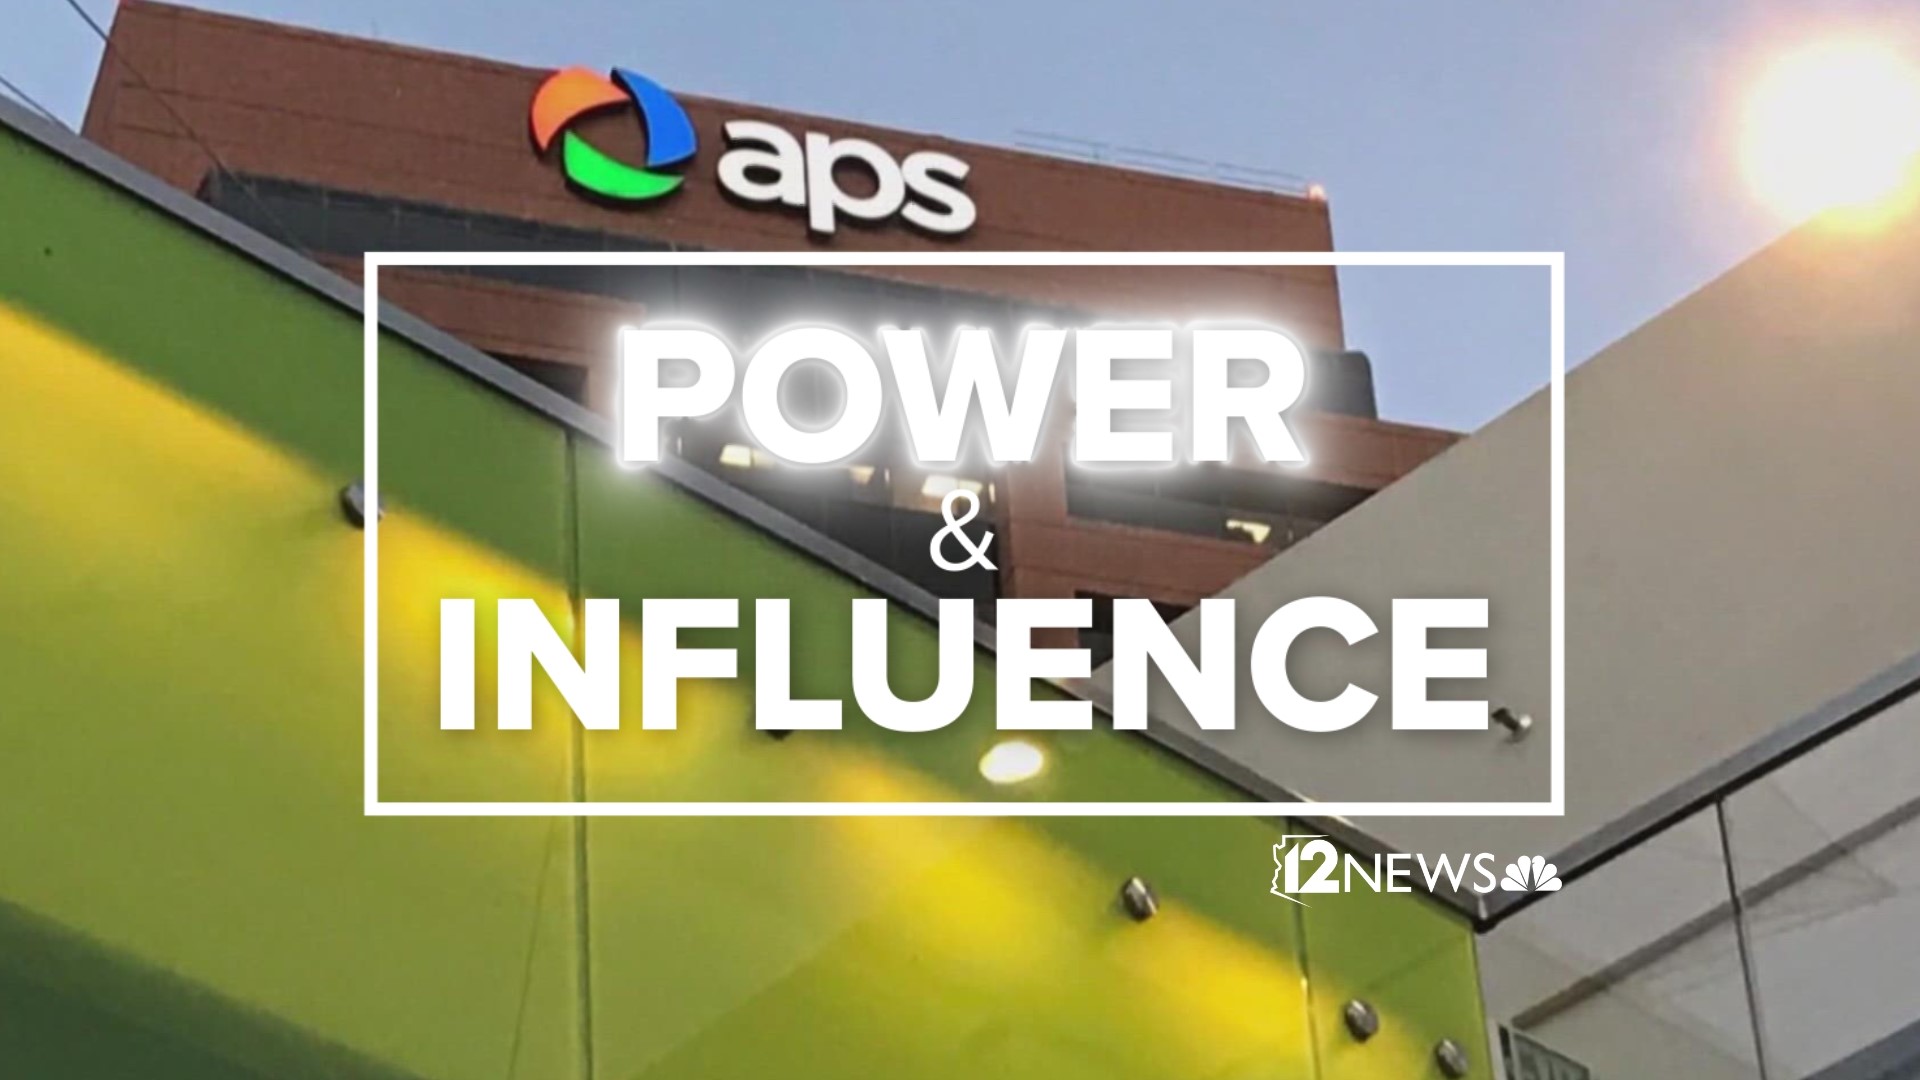 APS says it's unreasonable to compare the companies, but consumers demand APS prove its higher rates are justified even as the utility requests another rate increase